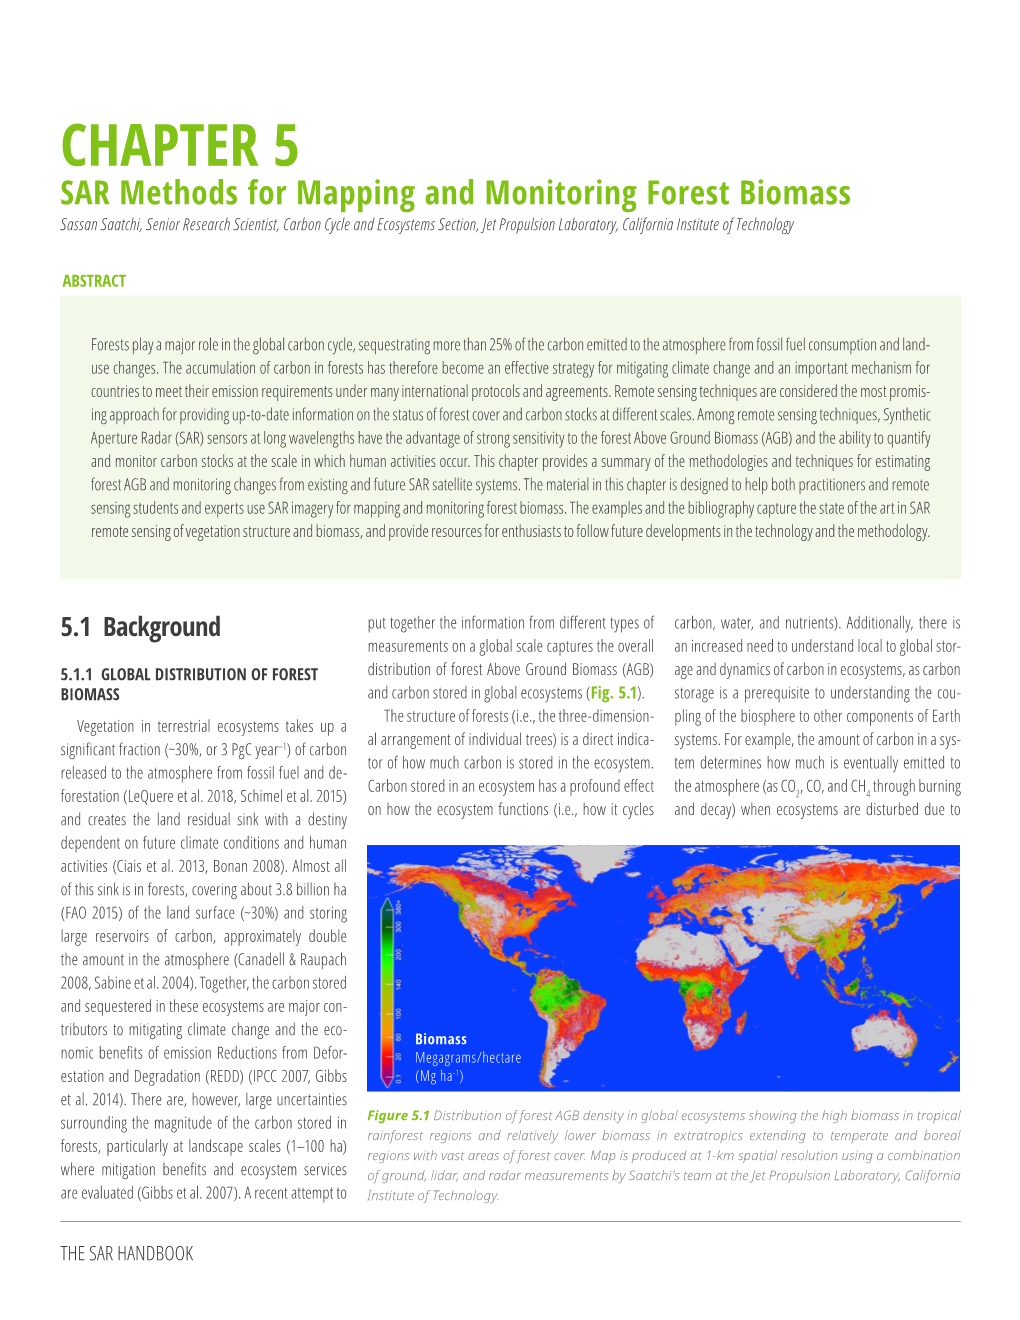 5.4 SAR Remote Sensing of Forest Biomass